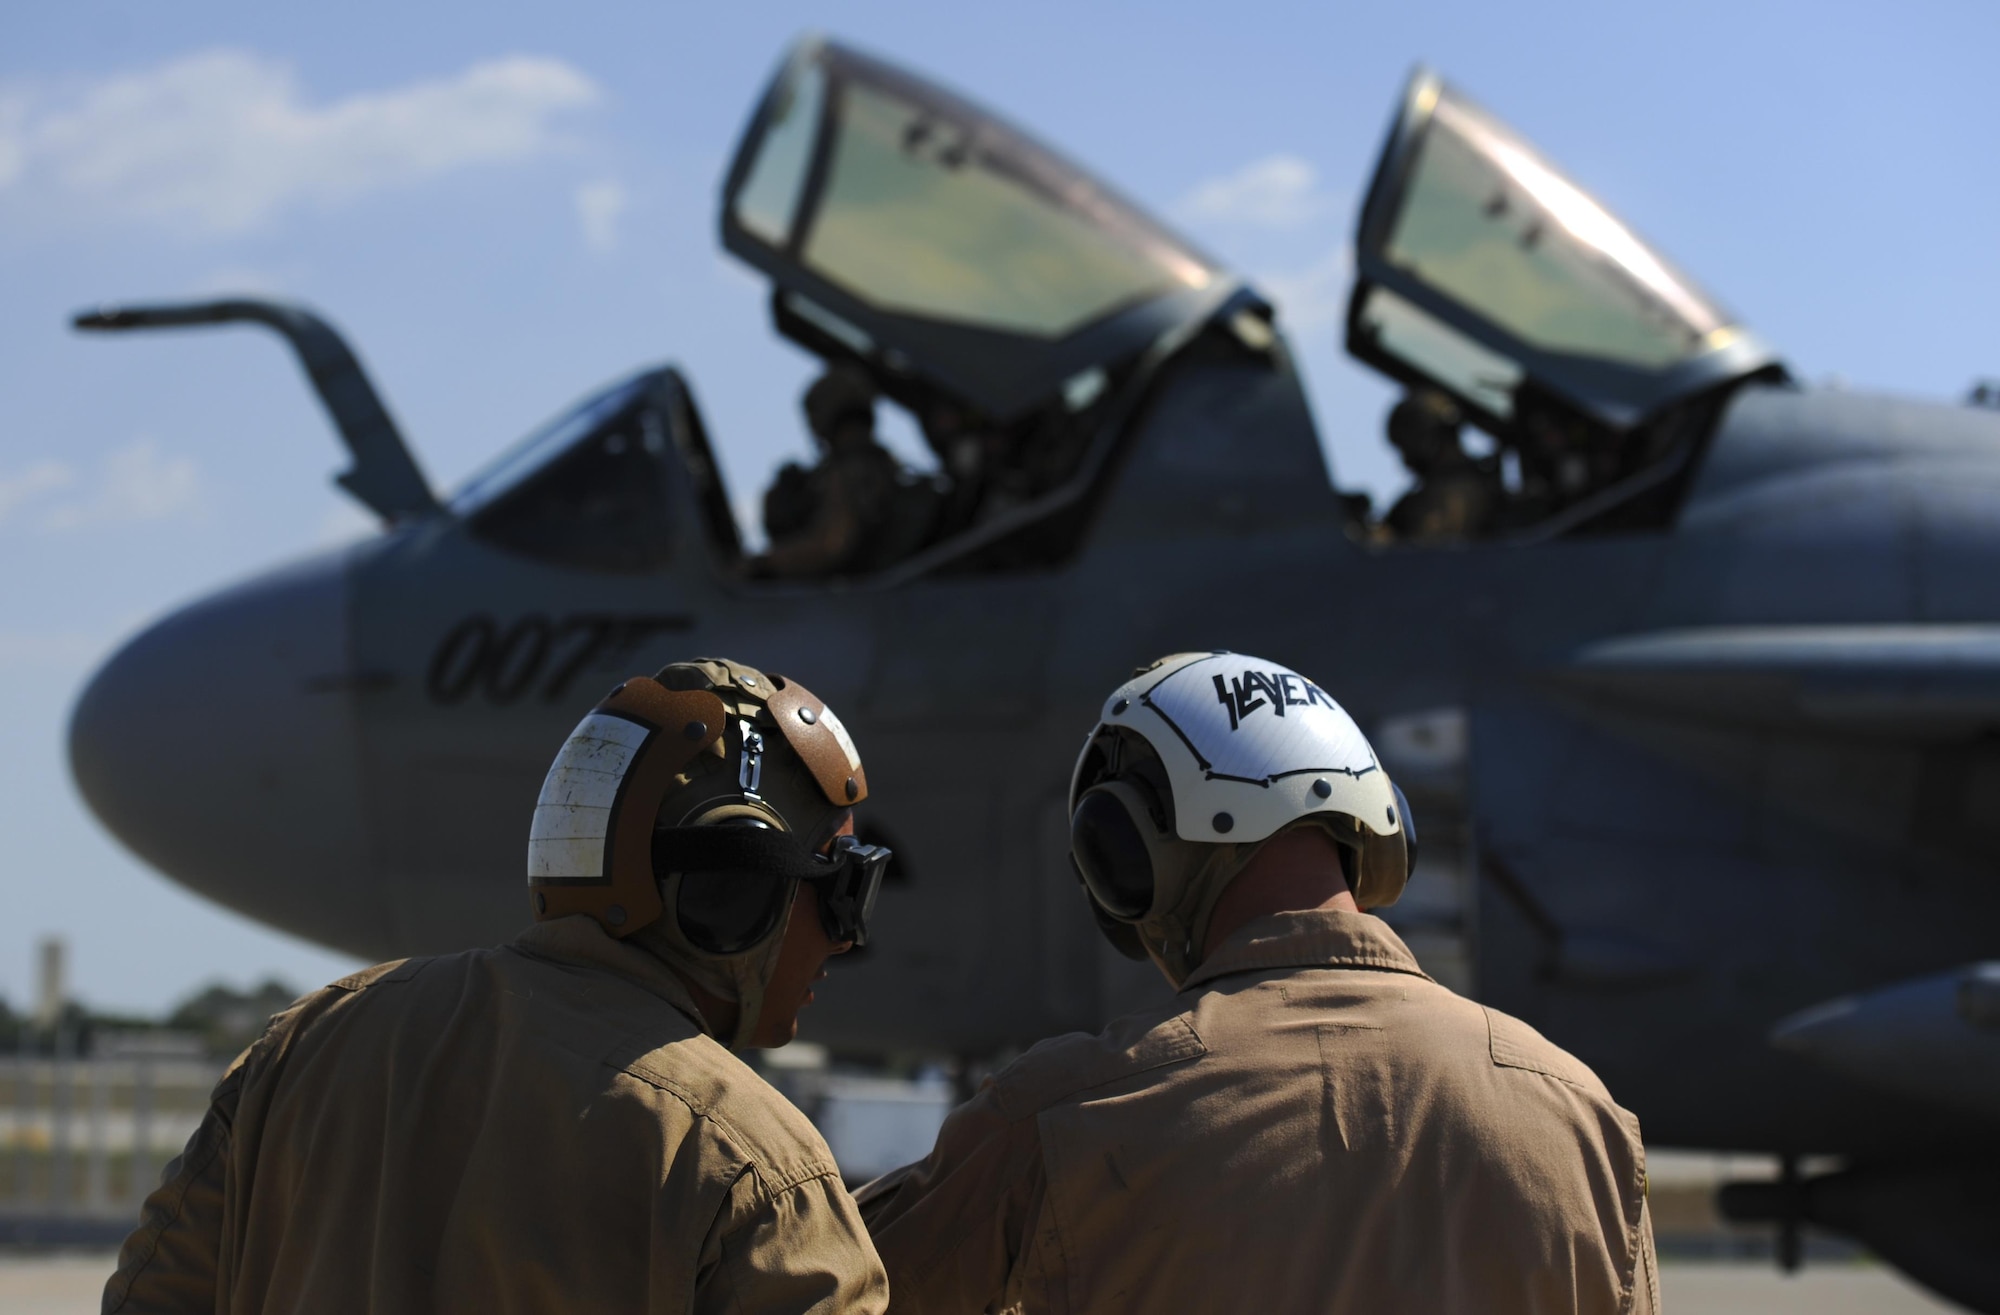 U.S. Marine Corps Sgt. Eduardo Mendez, Tactical Electronic Warfare Squadron 4 (VMAQ-4) powerline collateral duty quality assurance representative, and Staff Sgt. Brian Franzi, VMAQ-4 quality assurance representative, standby during a preflight check on an EA-6B Prowler Sept. 16, 2016, at Incirlik Air Base, Turkey. The Prowler is used as an electronic warfare platform to disable enemy communication capabilities. (U.S. Air Force photo by Airman 1st Class Devin M. Rumbaugh)